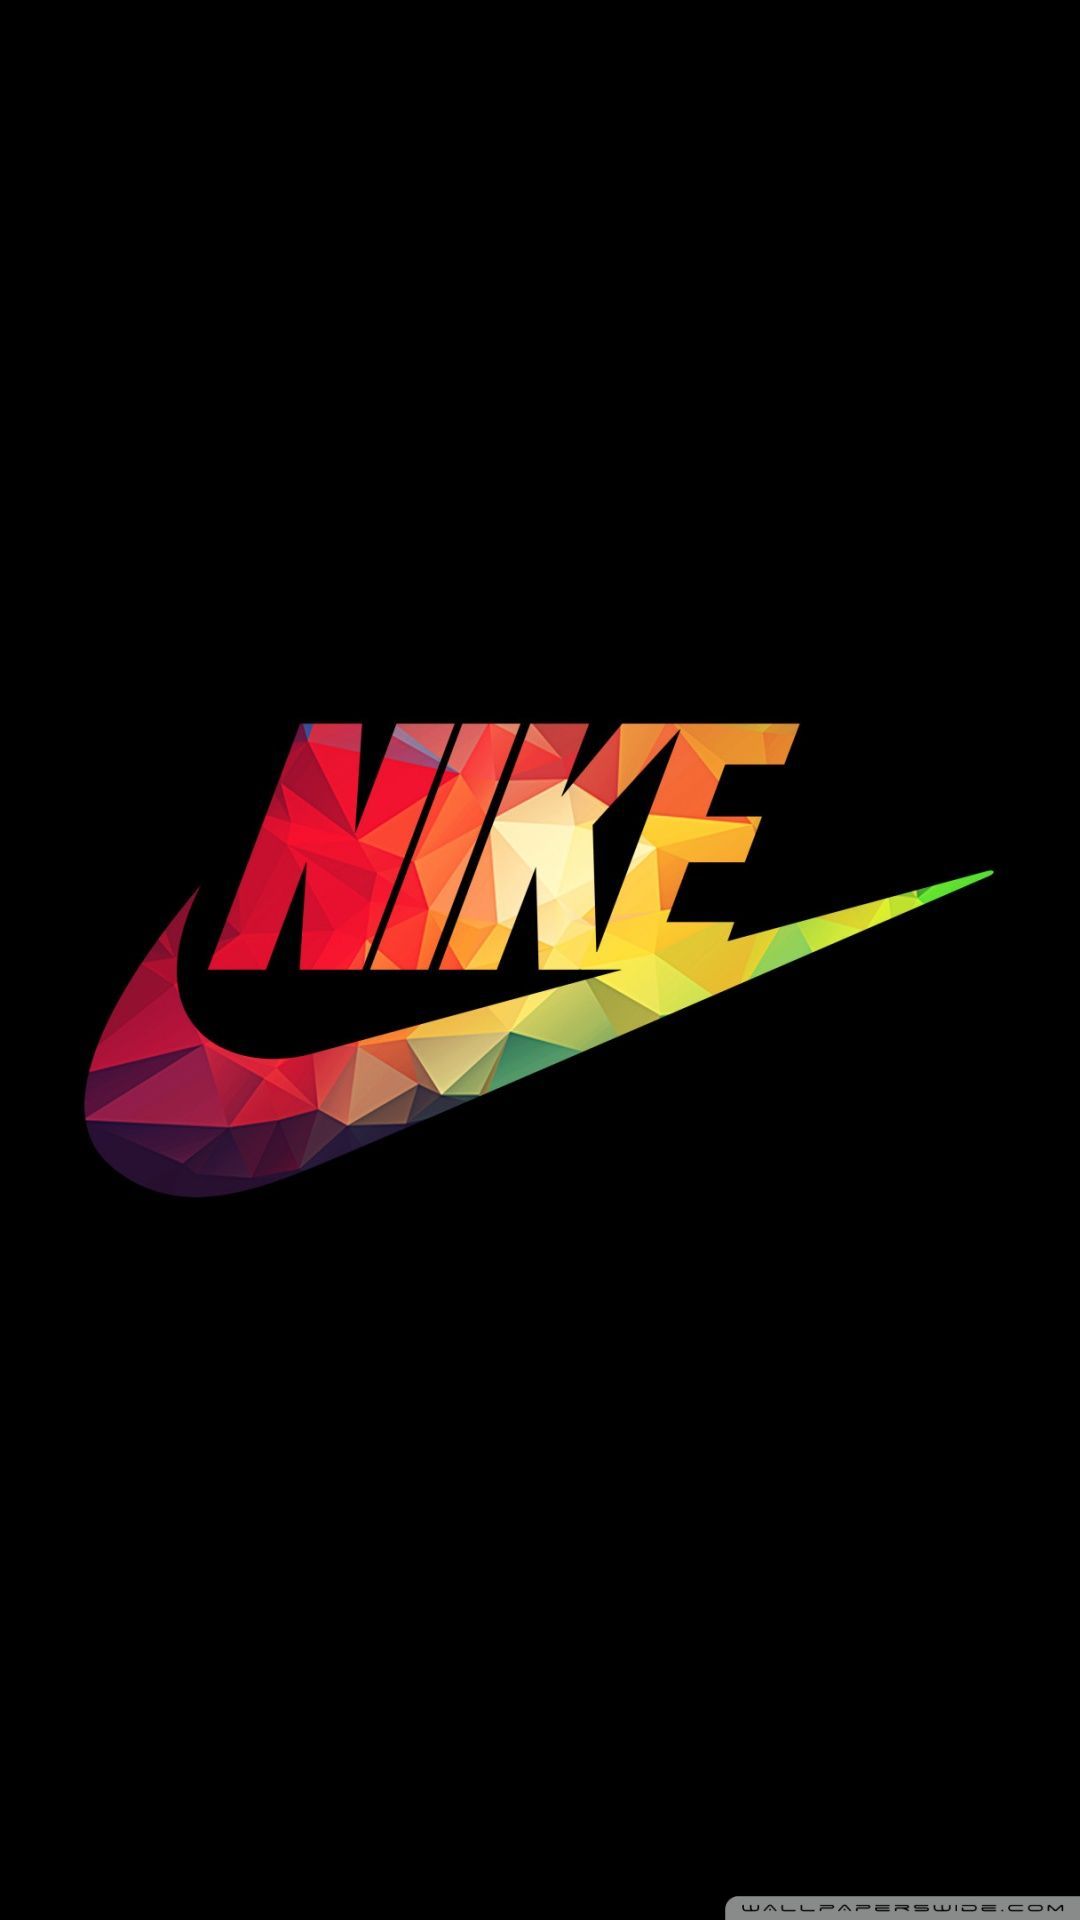 Galaxy Nike Hd Iphone Wallpapers » Hupages » Download Iphone Wallpapers Galaxy Nike… in 2020